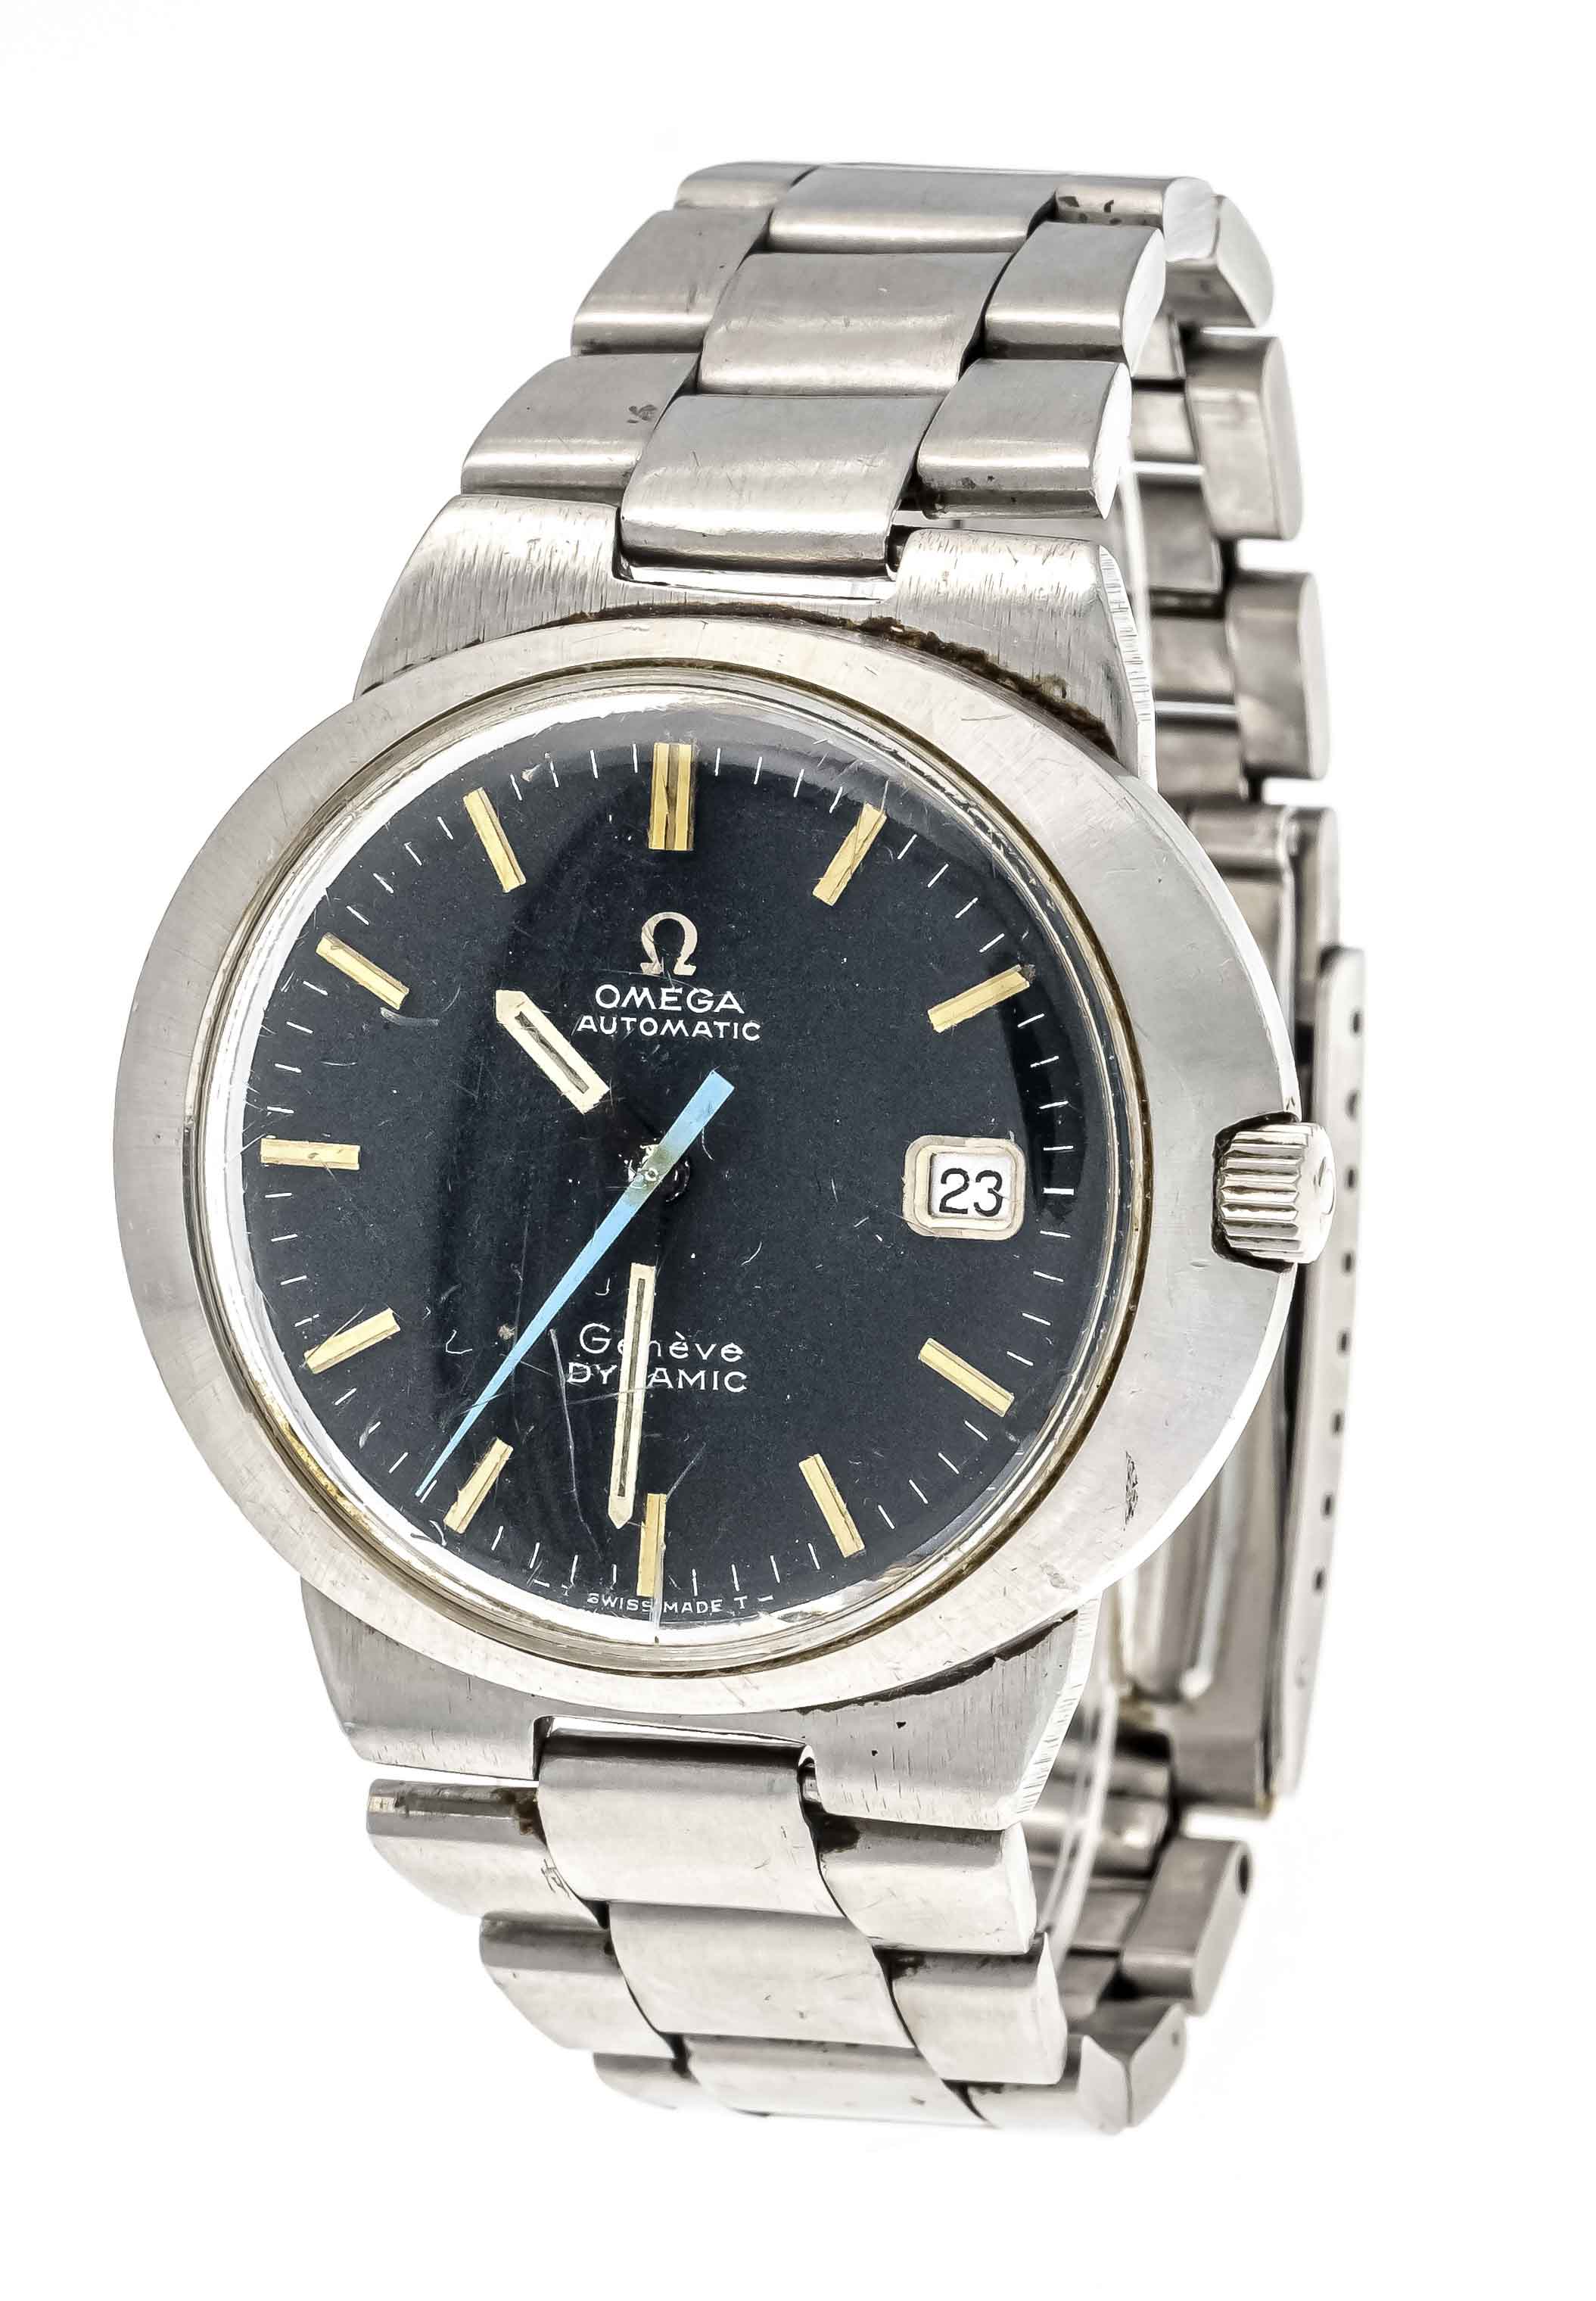 Omega Automatic, Geneve Dynamic, ref. 135/136/165/168.059, circa 1965-70, steel case and bracelet,